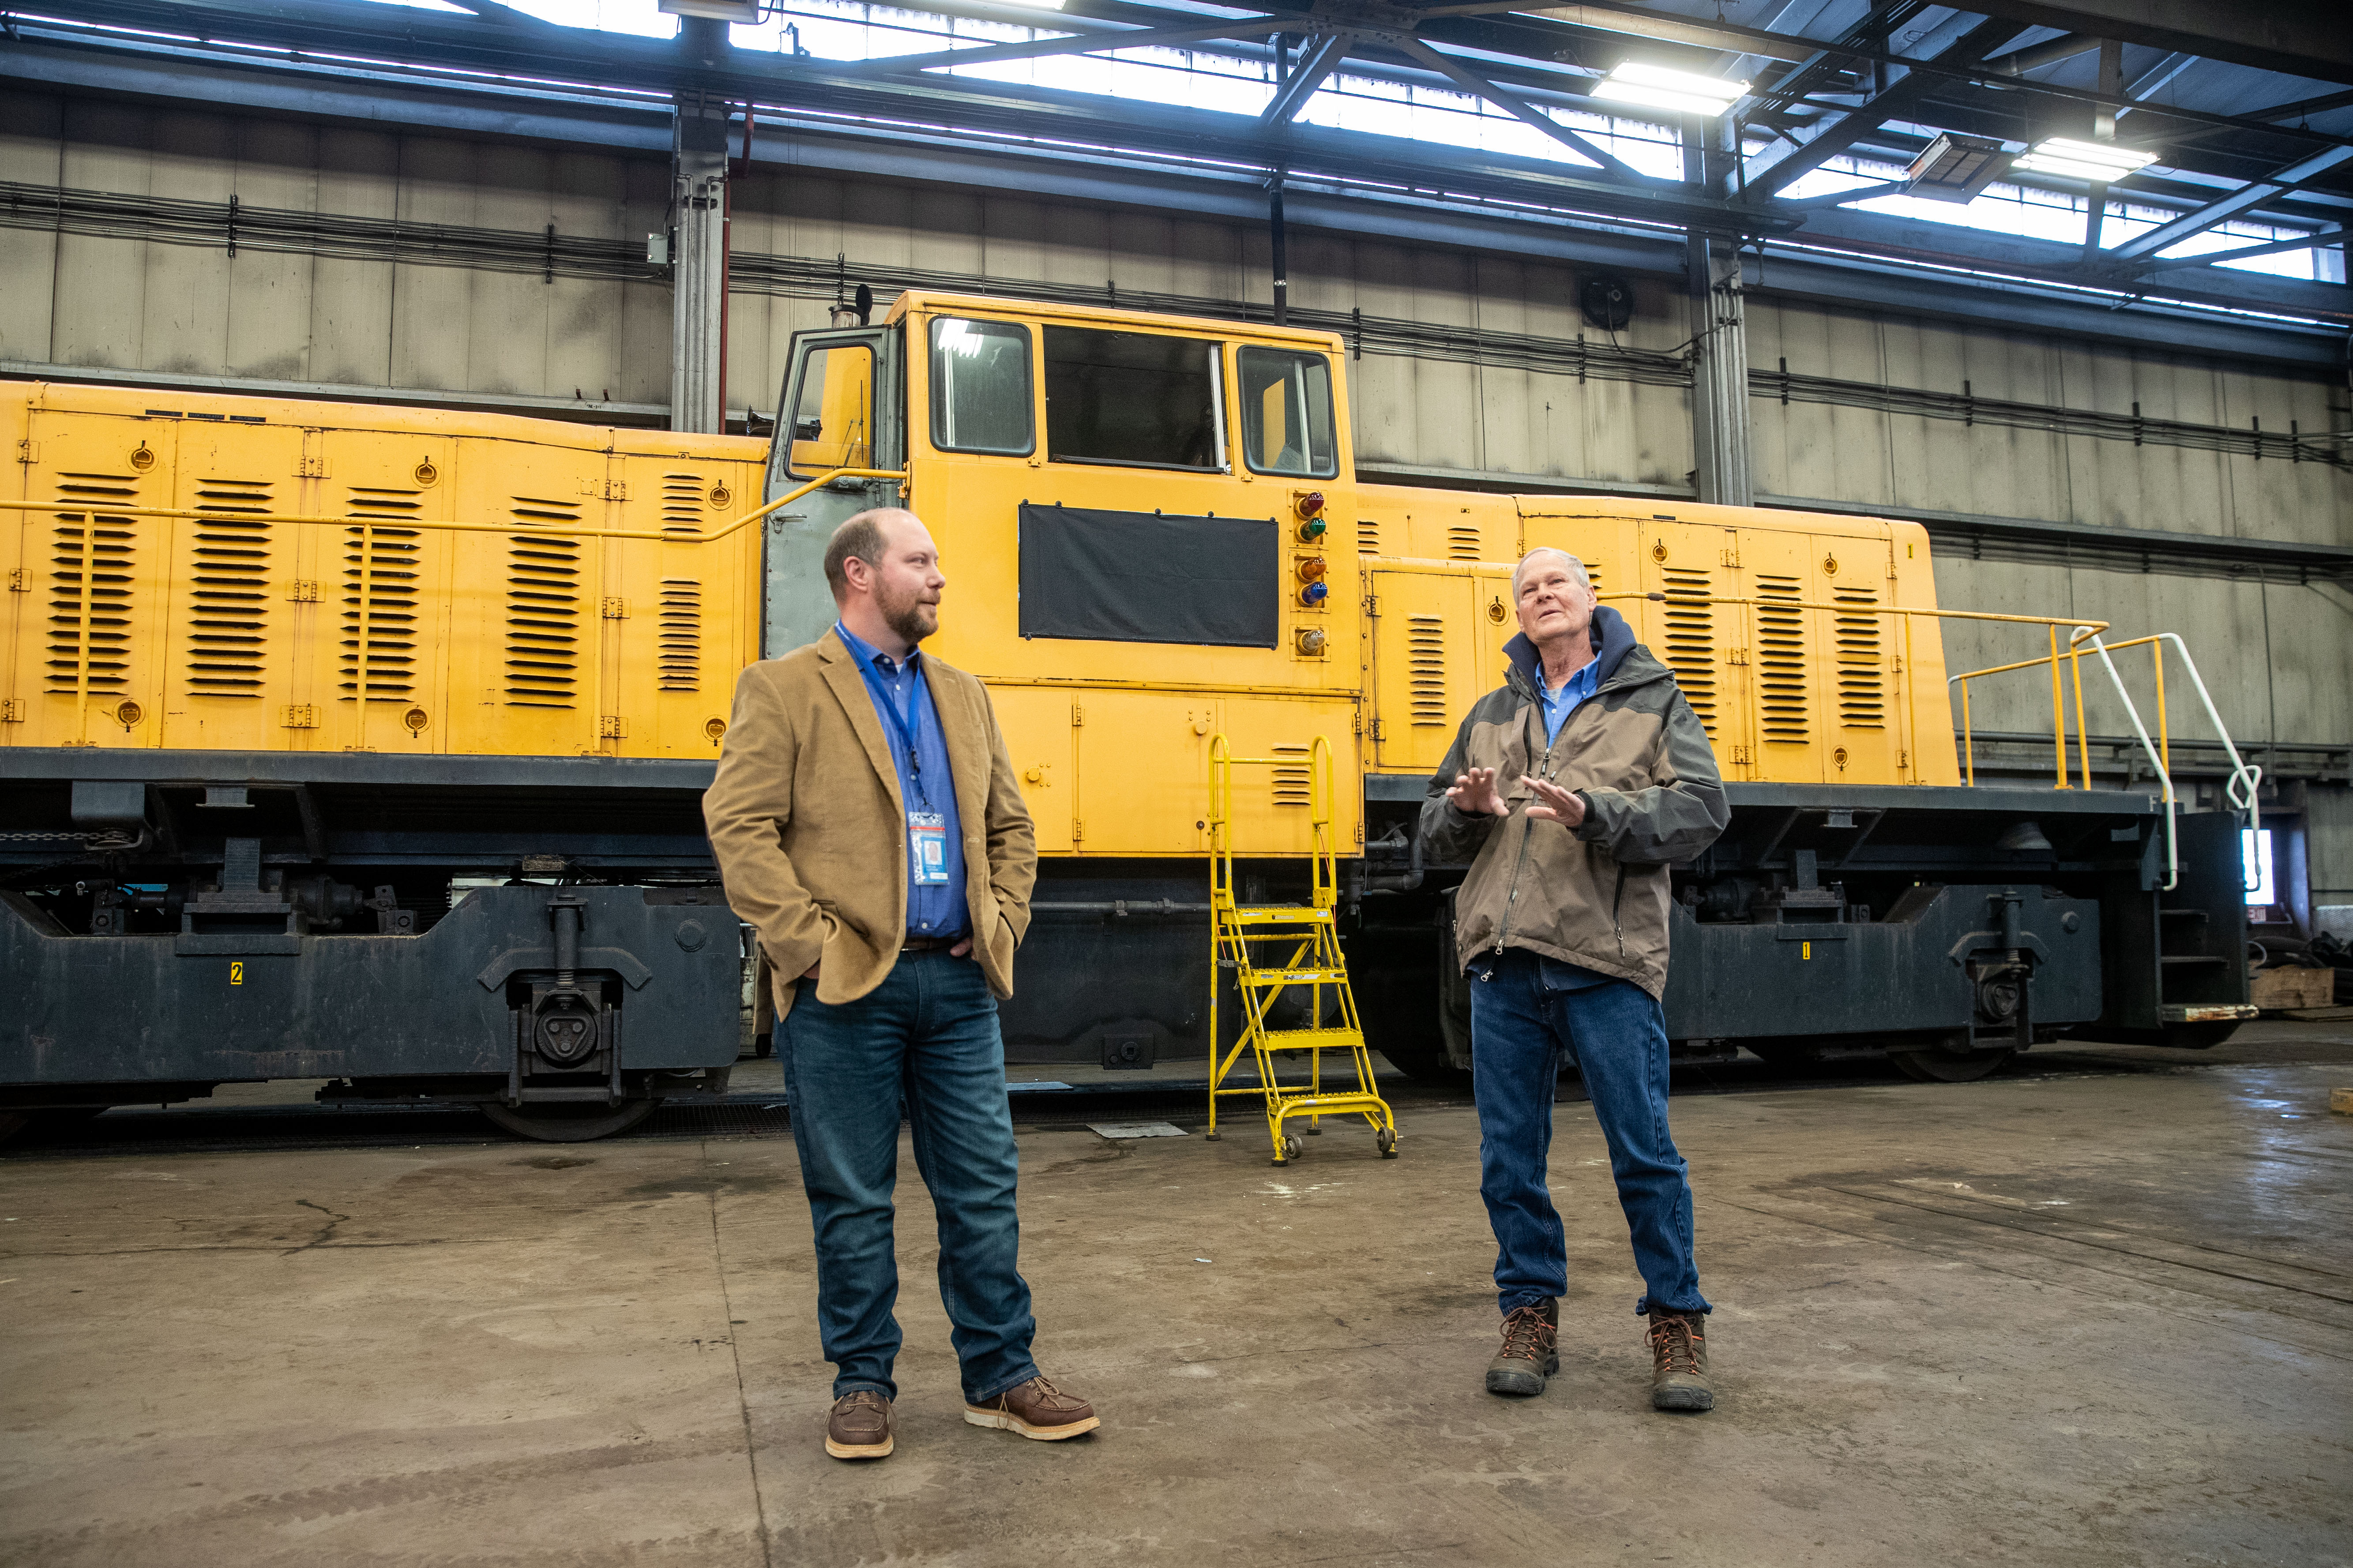 Nathan Hoffman, left, director of operations at the Consumers Energy J.H. Campbell plant, and Jeff DuPilka, president of Coopersville and Marne Railway, speak in front of a 1979 GE diesel train locomotive at the plant in Port Sheldon Township on Monday, Feb. 13, 2023. Consumers Energy is donating the locomotive to the Coopersville and Marne Railway. (Cory Morse | MLive.com)